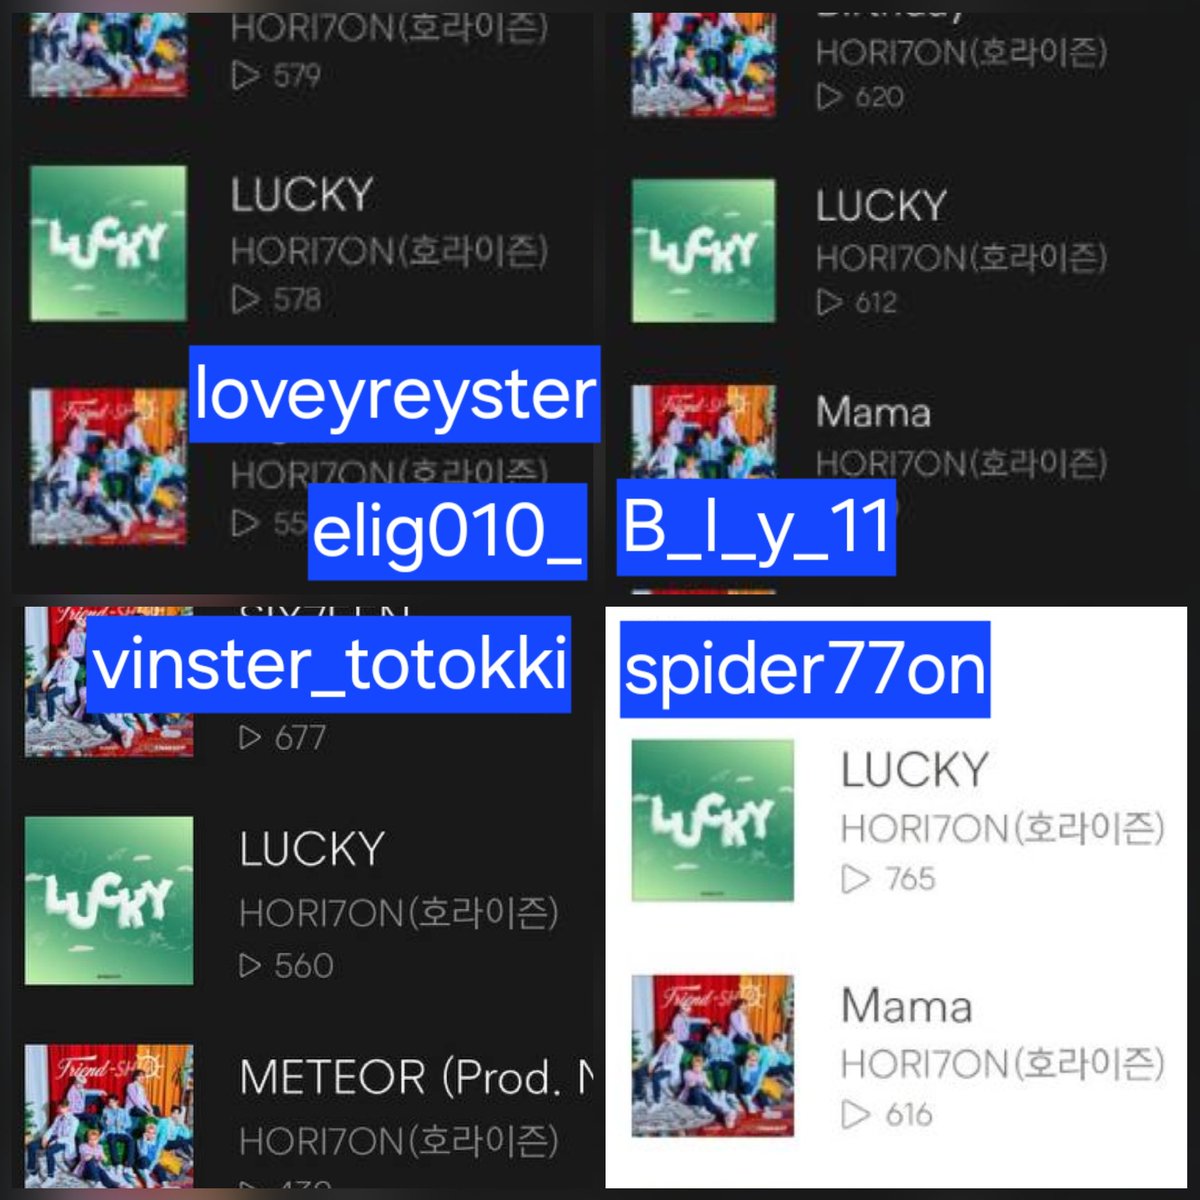 BUGS Korean app

Start: 04 March 24
End: 30 March 24

Amazing stream count with 1 LUCKY stream count per hour.

@elig010_ 
@b_l_y_11 
@loveyreyster 
@vinster_totokki 

#HORI7ON #호라이즌 
@HORI7ONofficial